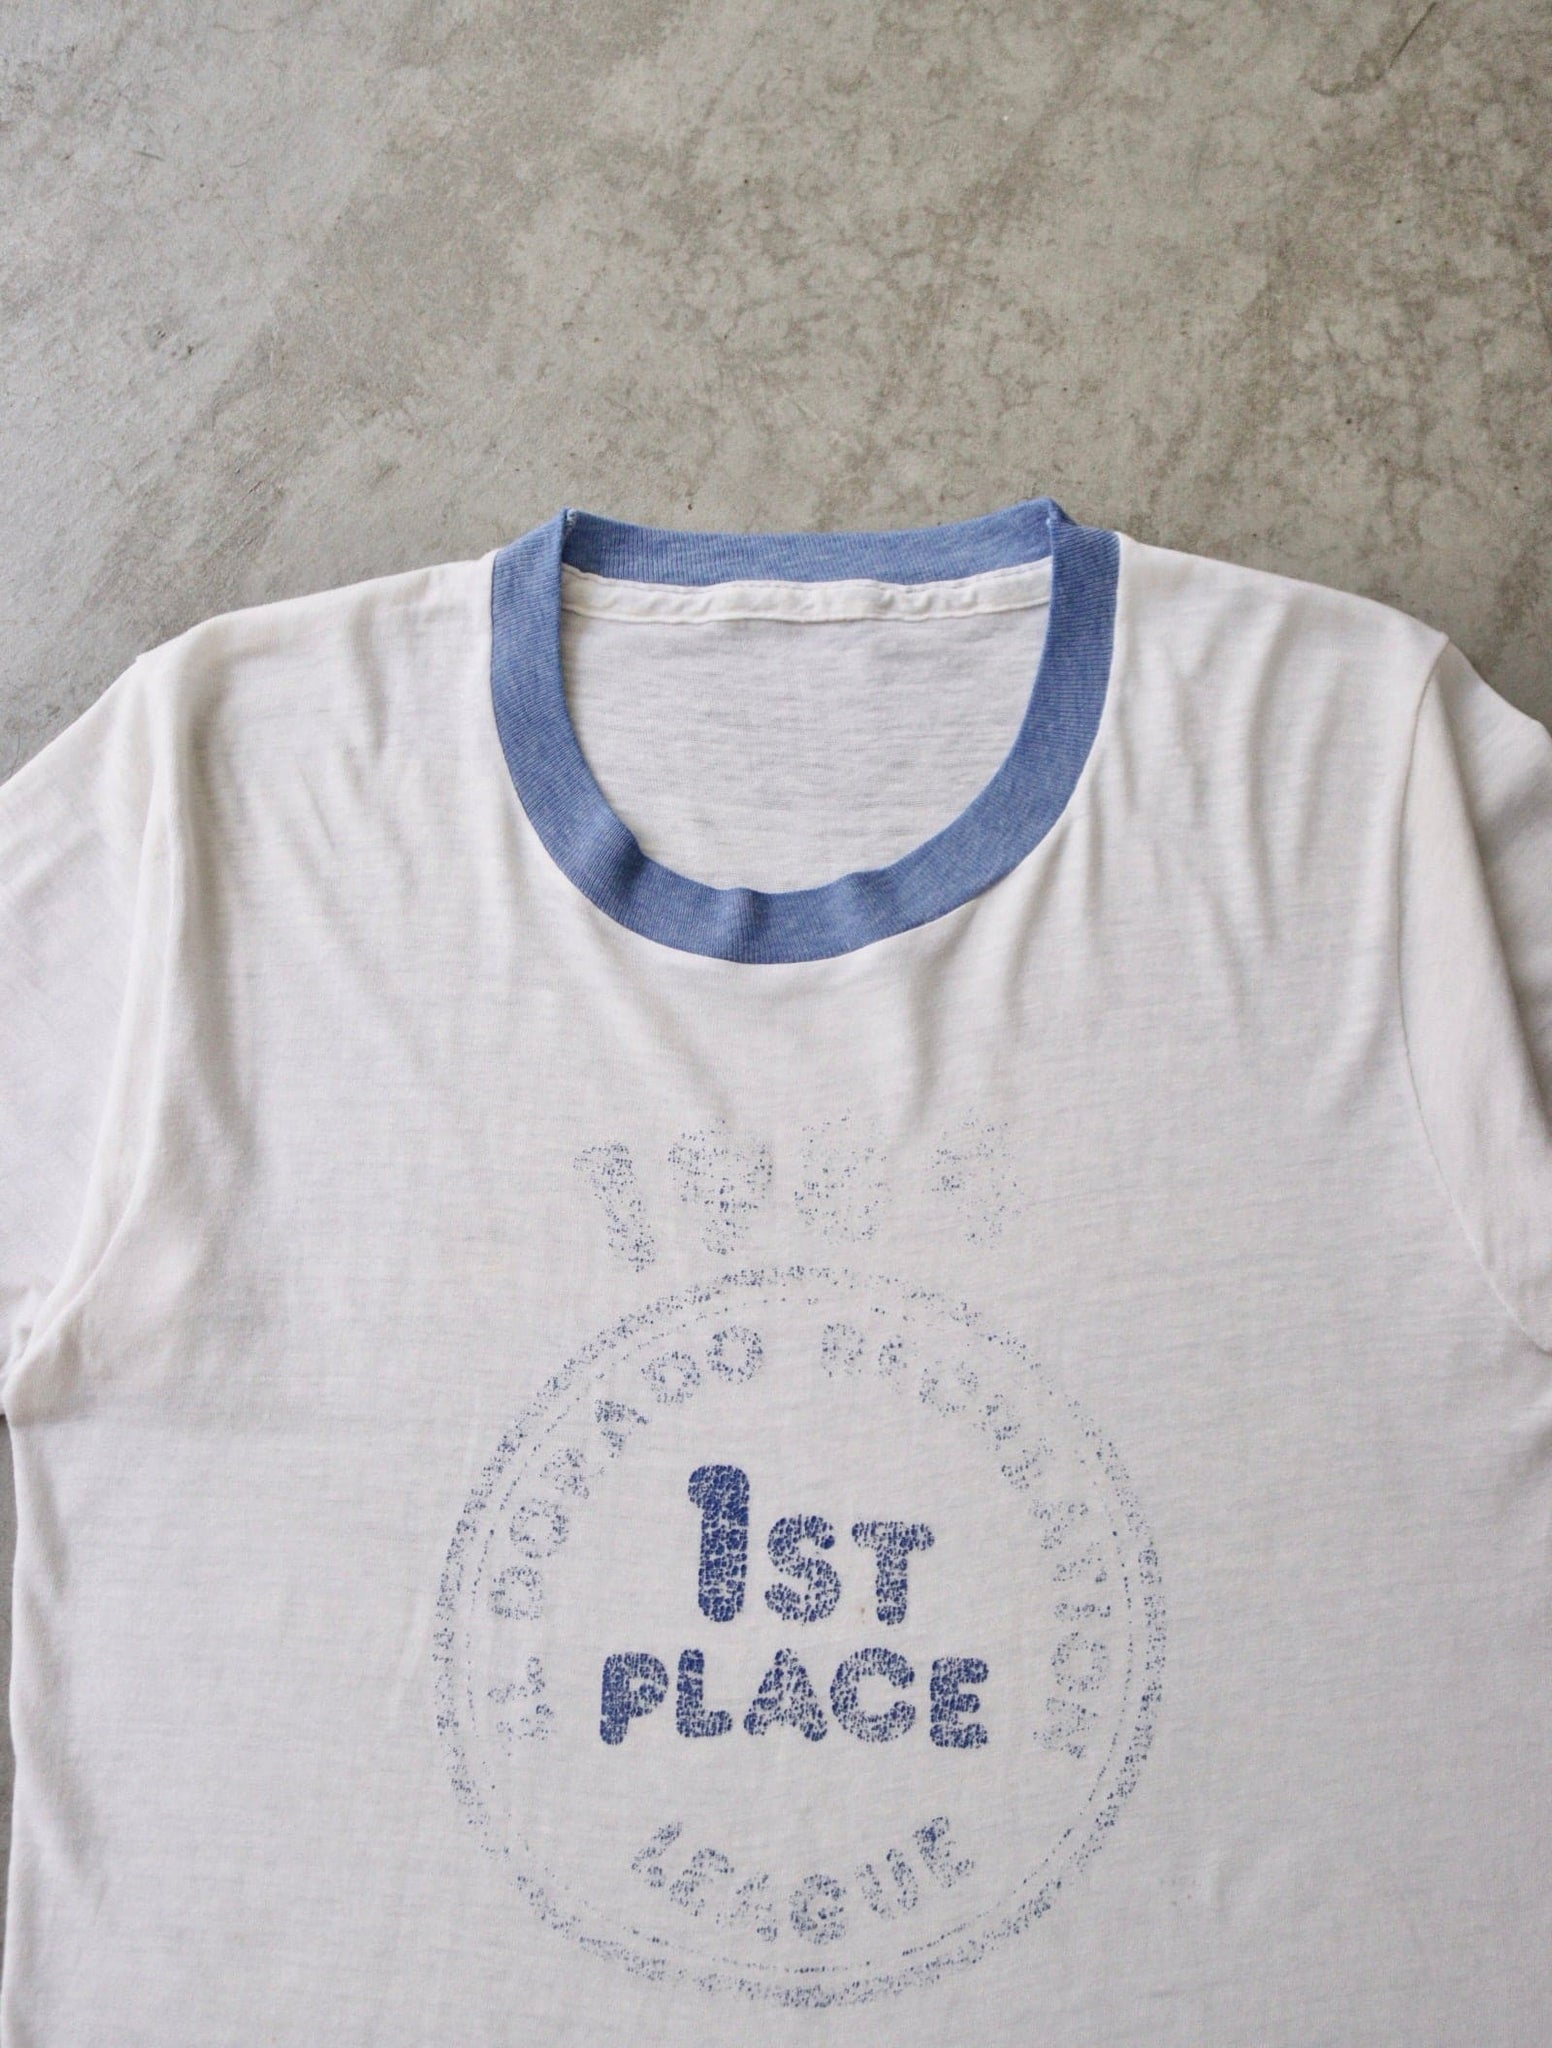 1980S FADED 1ST PLACE RINGER TEE